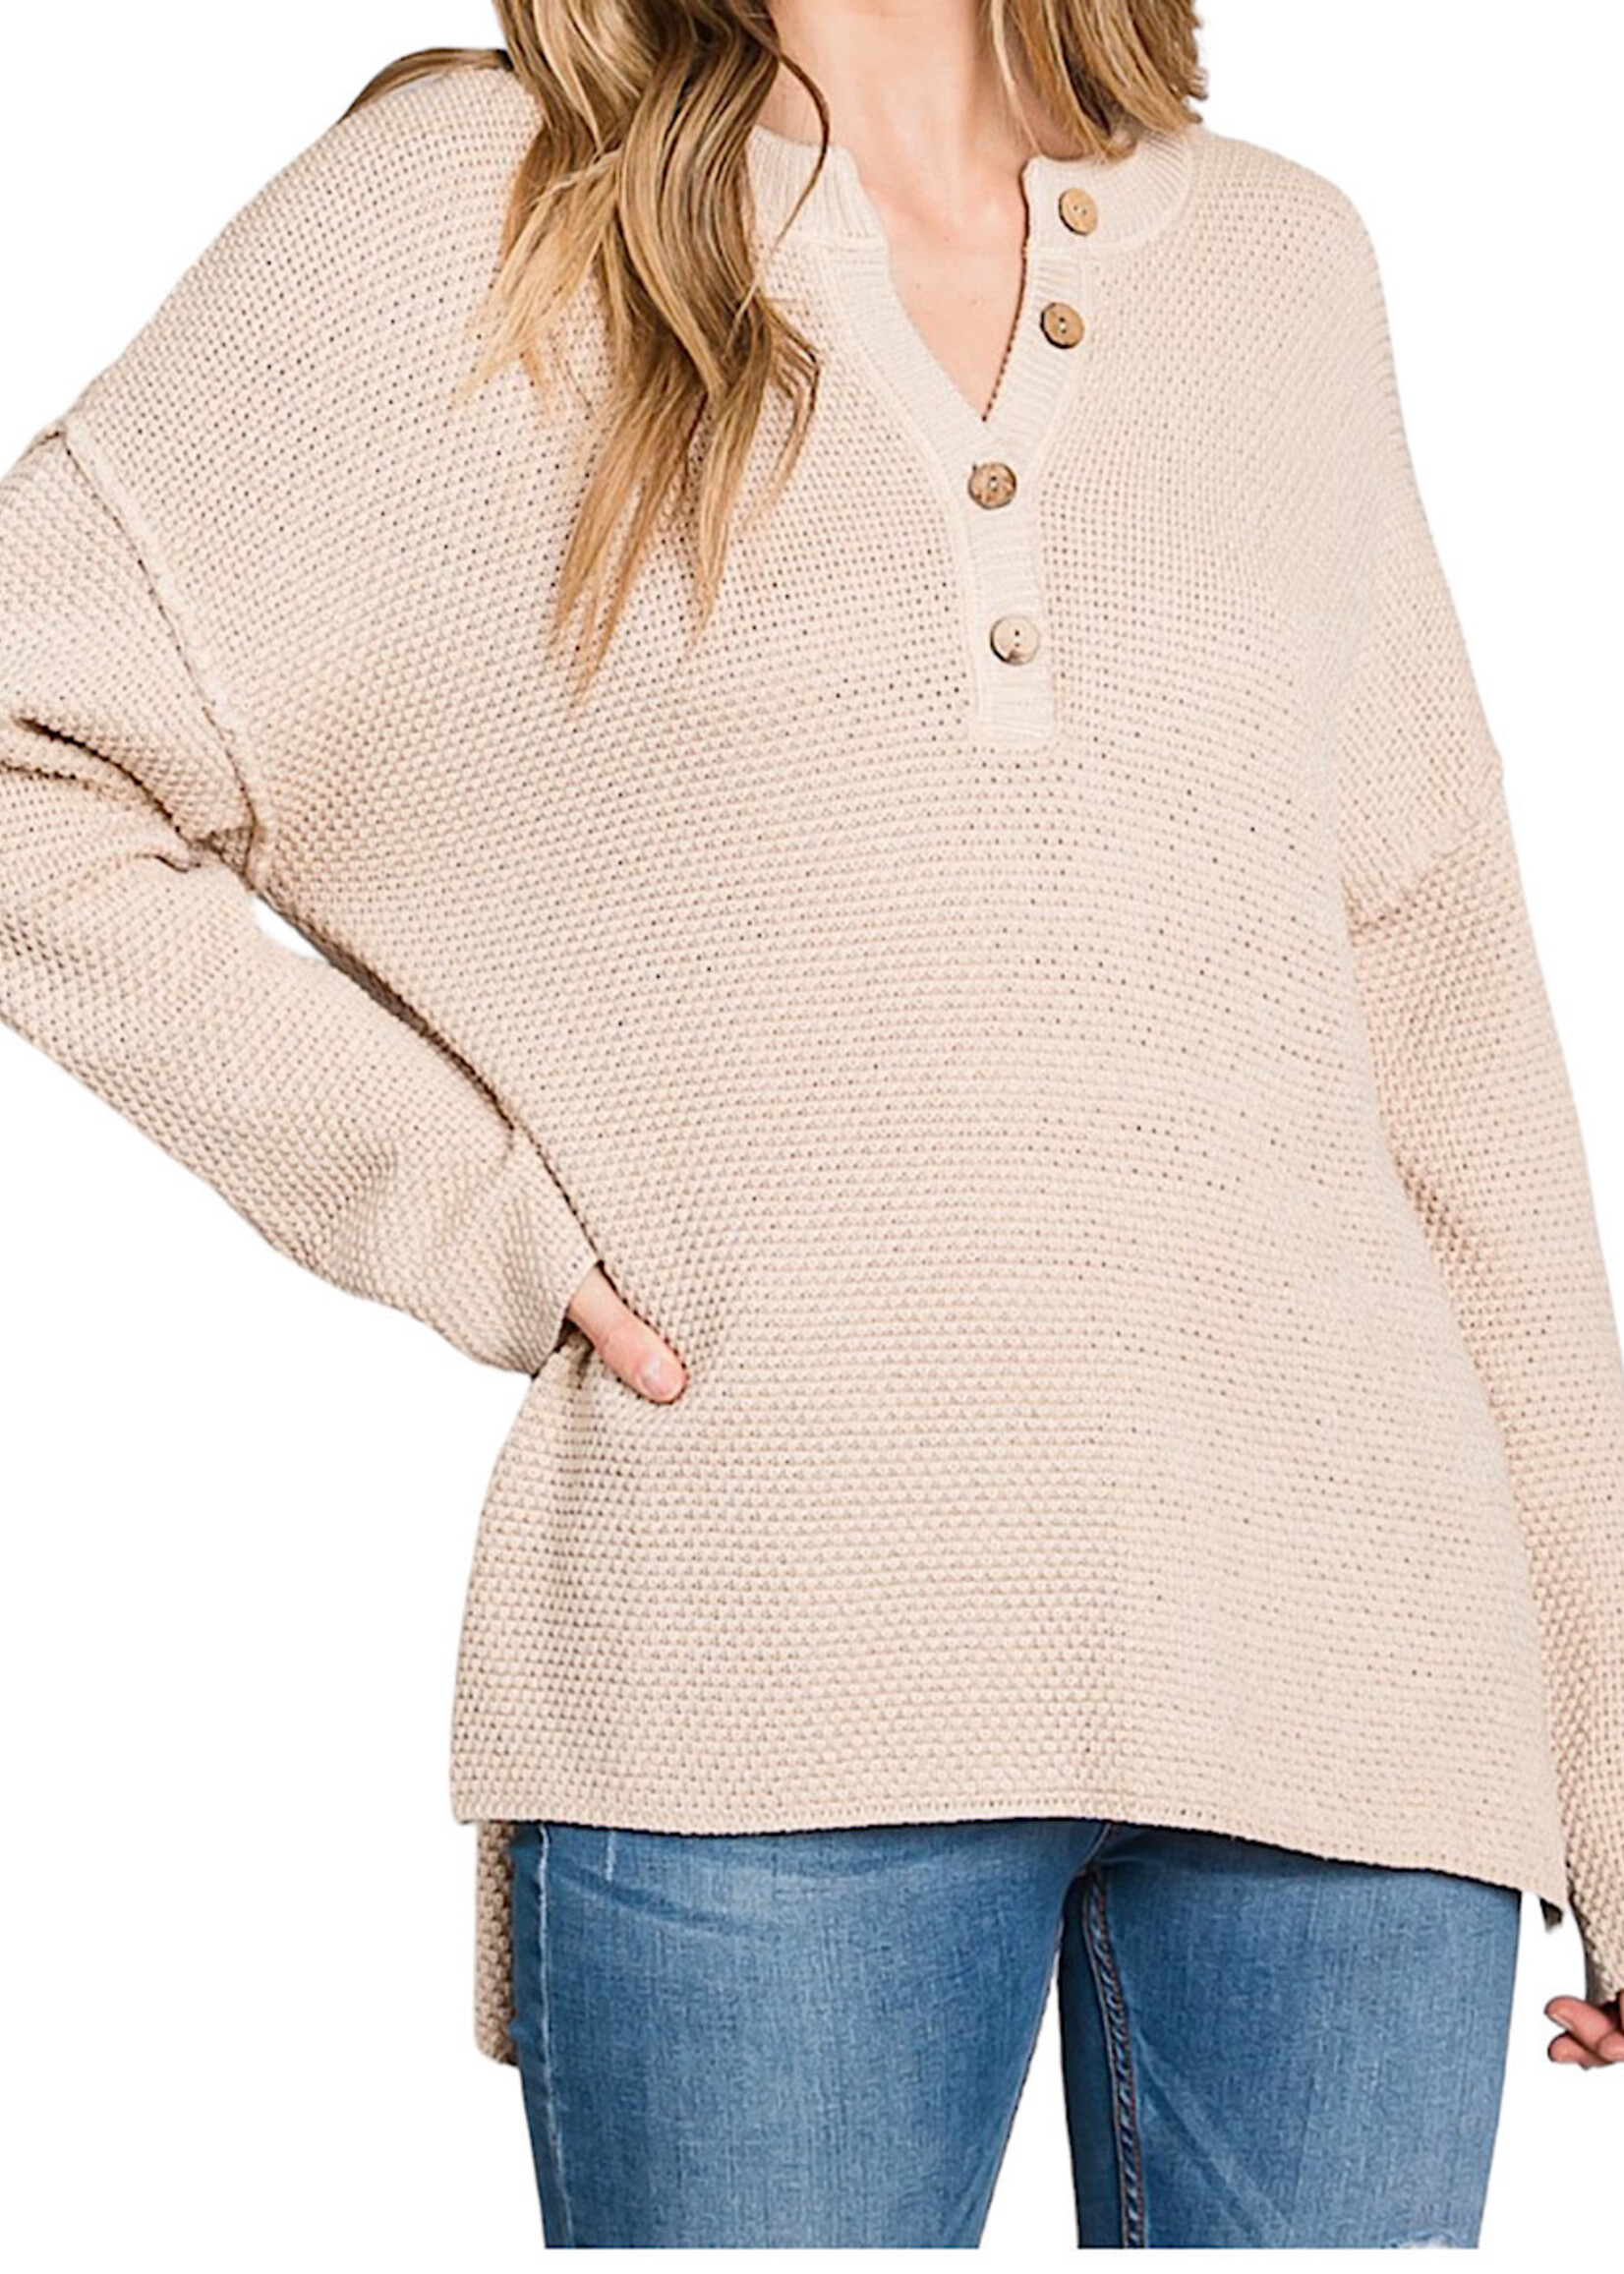 Plus Sand Comfy High/Low Oversized Henley Sweater Top